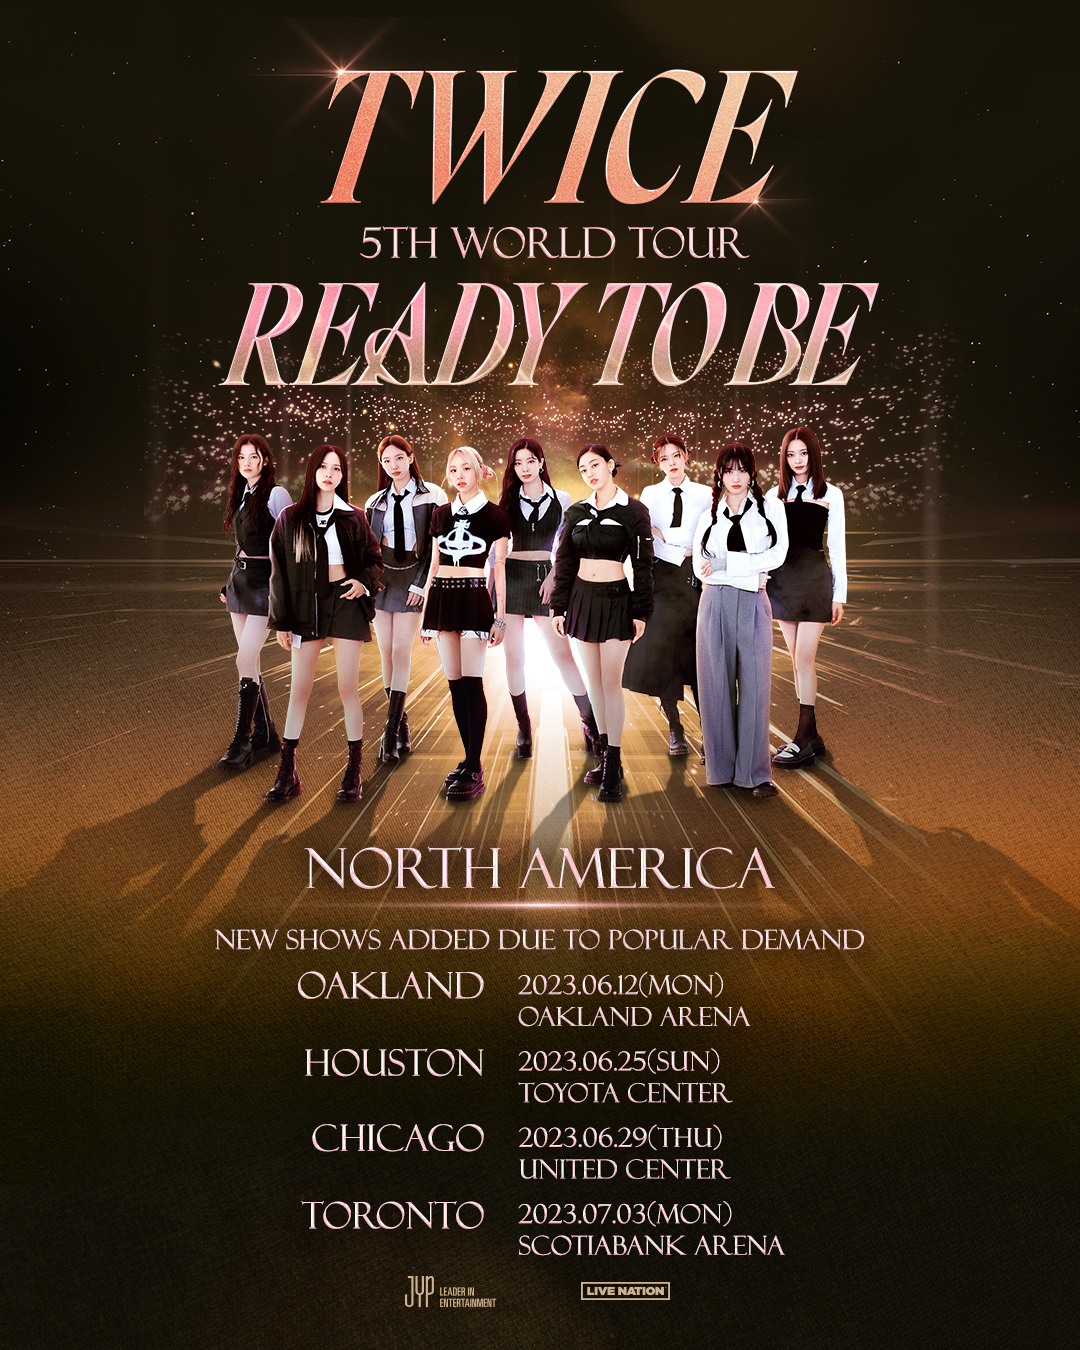 Live Nation Kpop on Twitter: "ONCE, ready for more TWICE?! Due to popular demand, 2ND SHOWS have been added in Oakland, Chicago, Houston and Toronto. Verified Fan begins tomorrow at 3PM